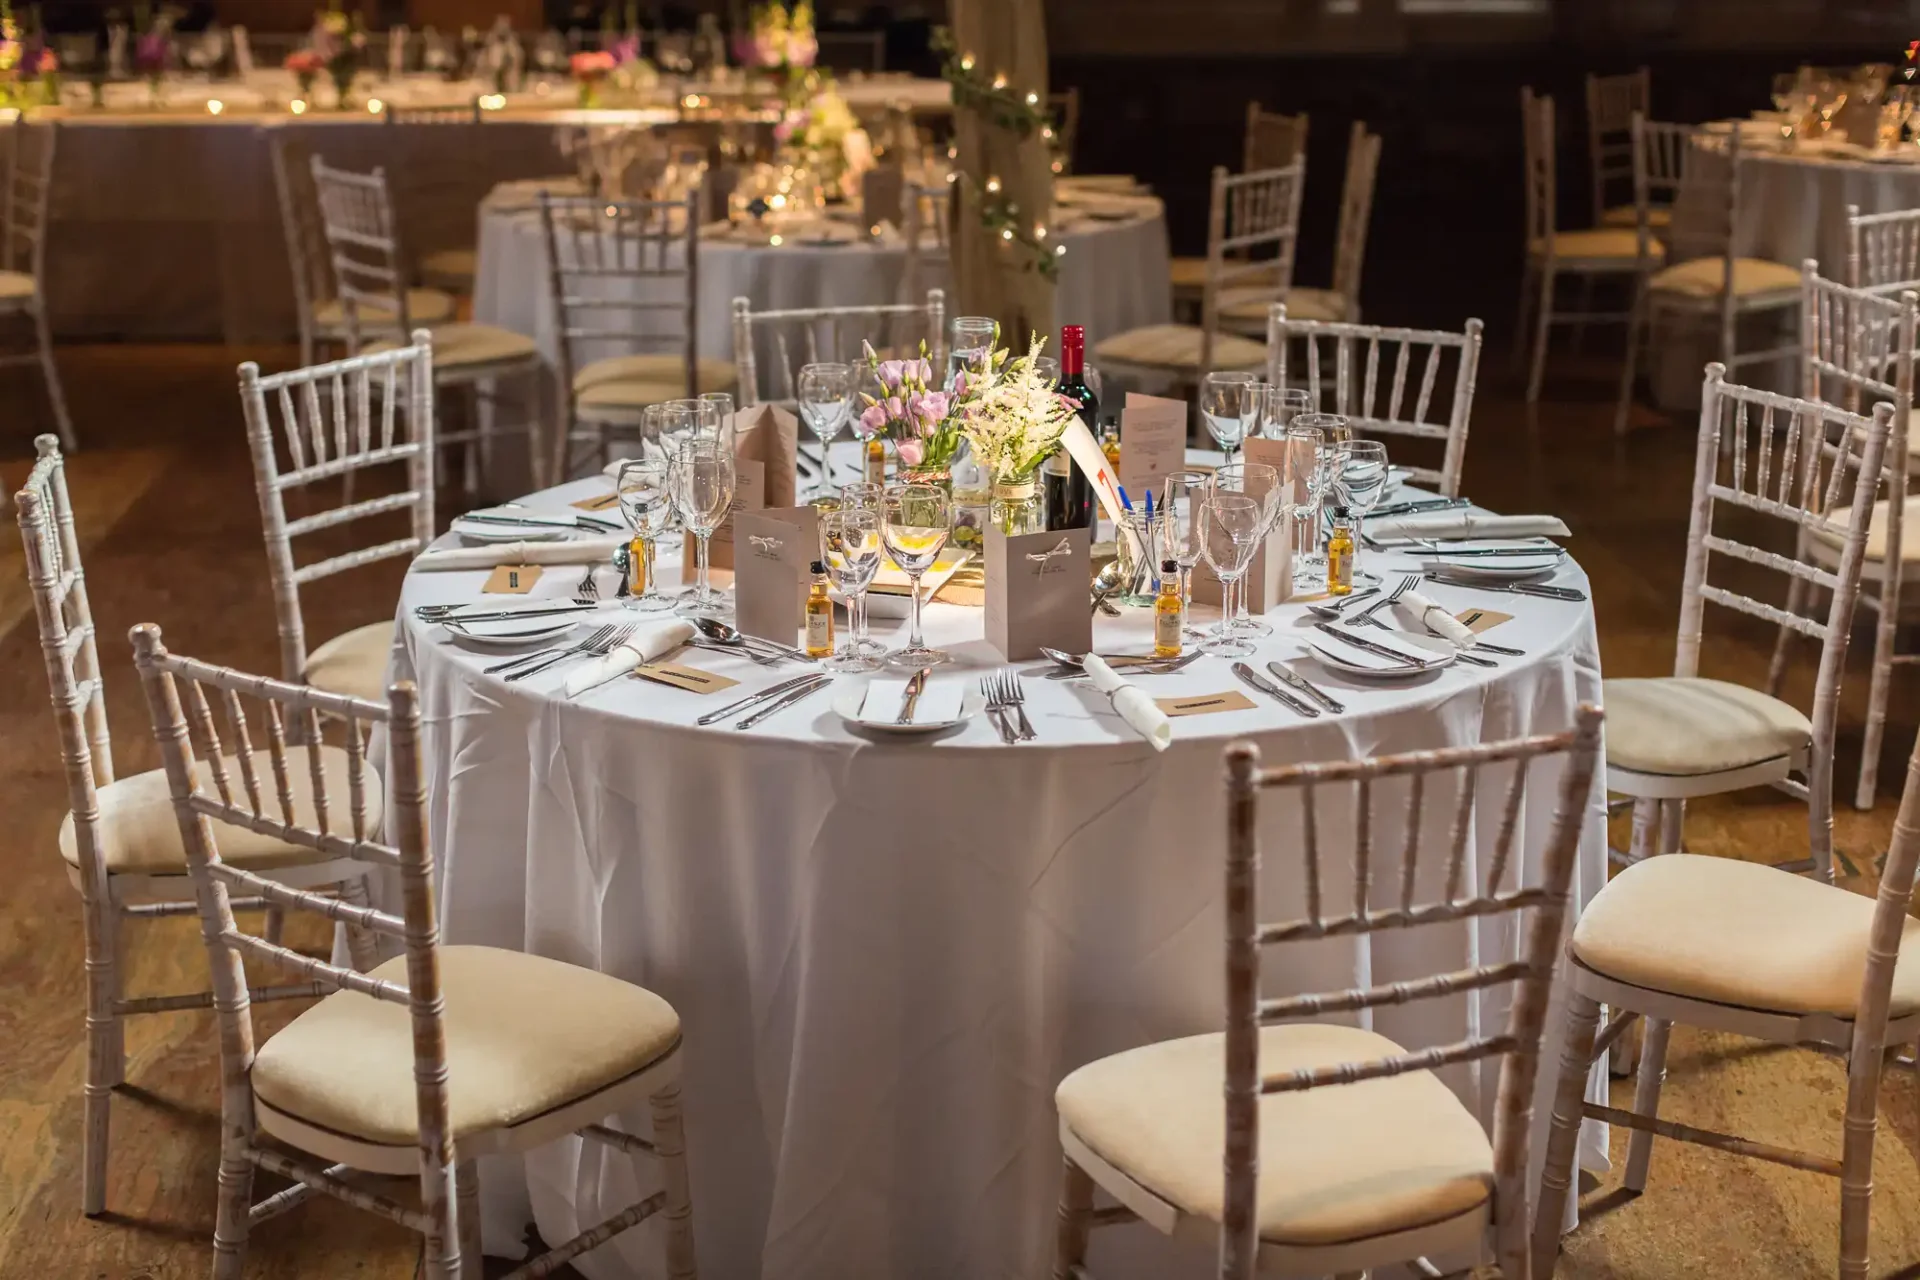 Elegant dining setup for a formal event with round tables, white linens, floral centerpieces, and chiavari chairs in a dimly lit venue.